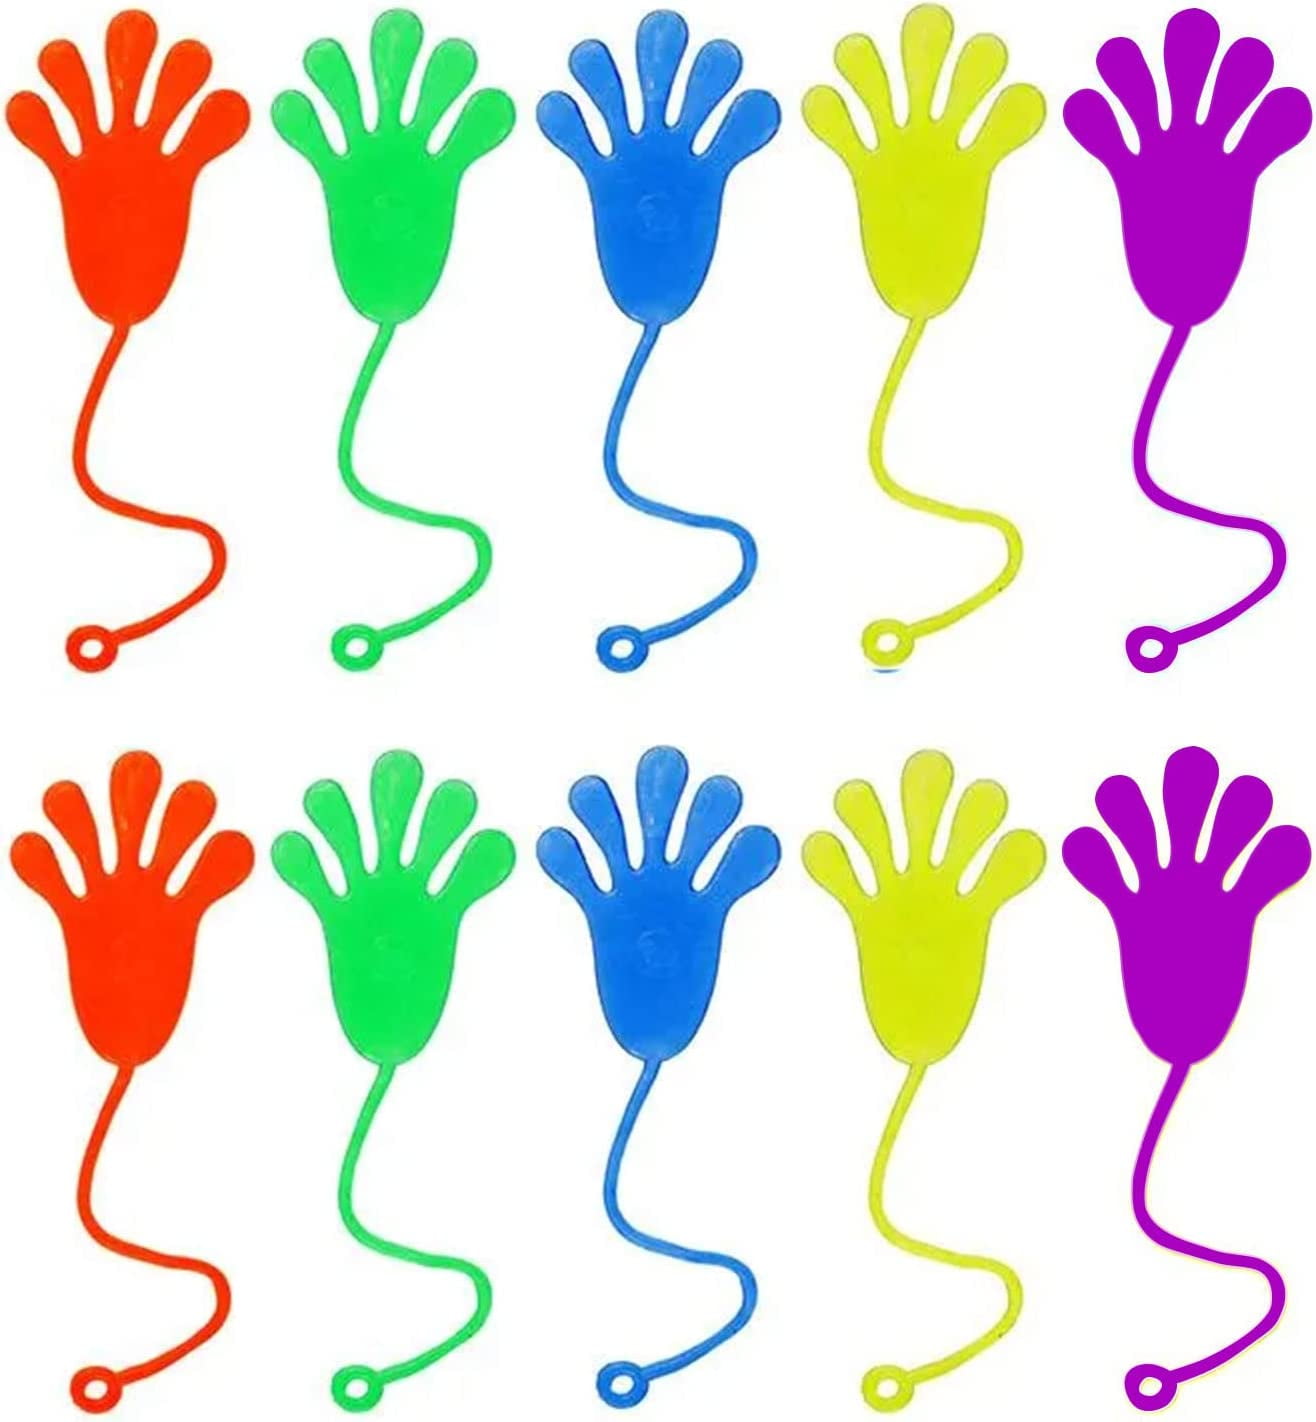 Sticky Glitter Hands - Pack of 24 - Stretchy Wacky Fingers - Fun Color ·  Art Creativity